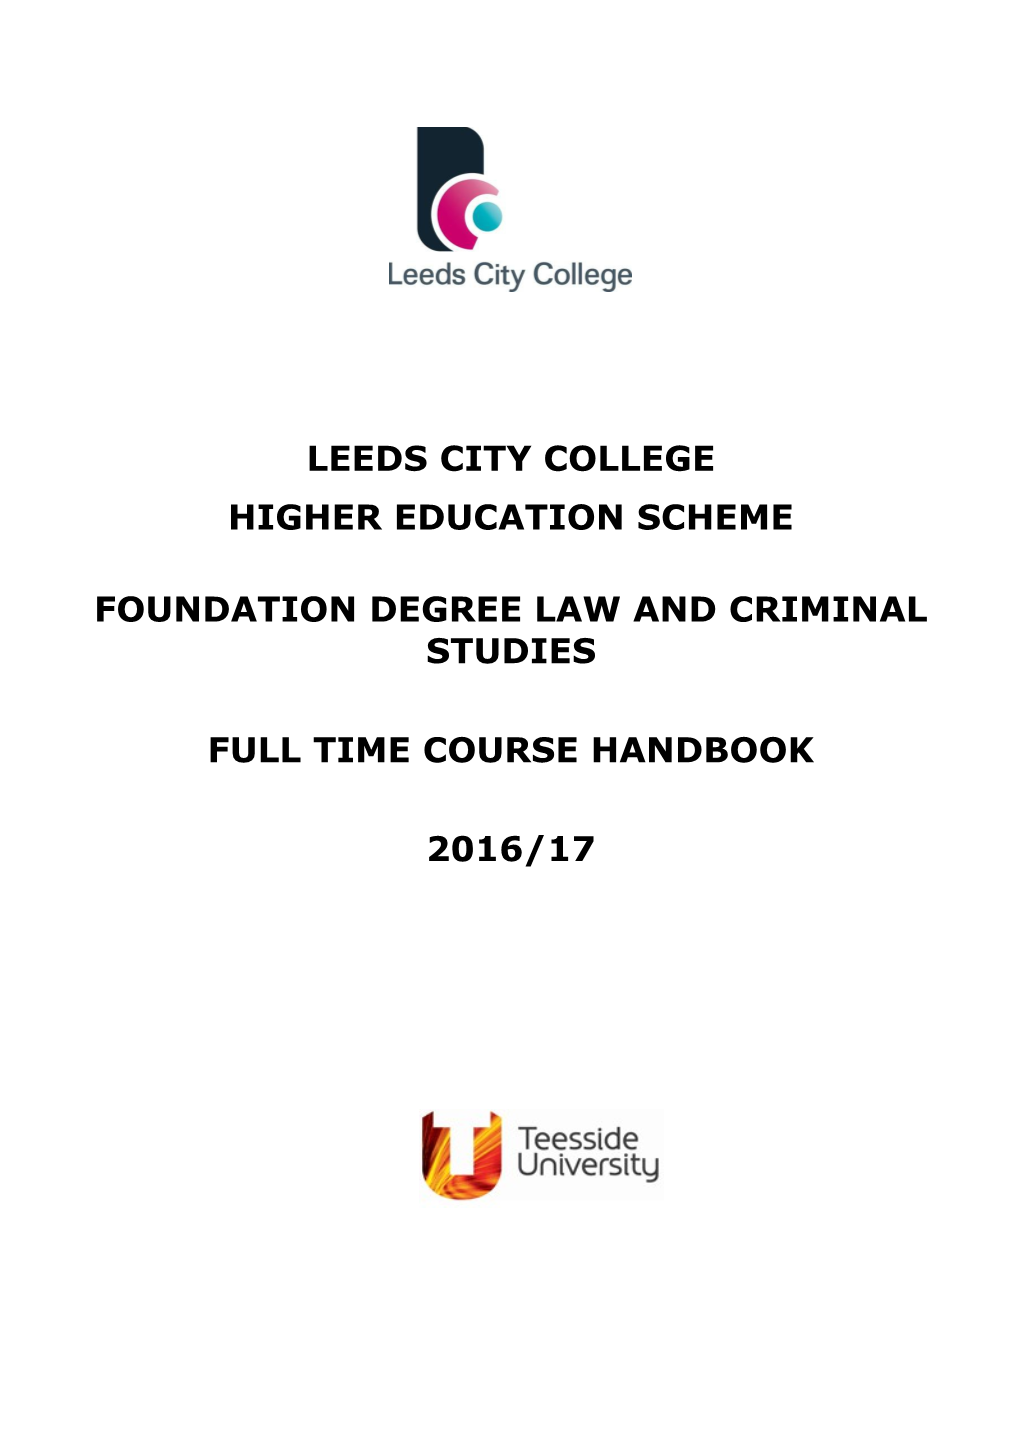 Foundation Degree Law and Criminal Studies